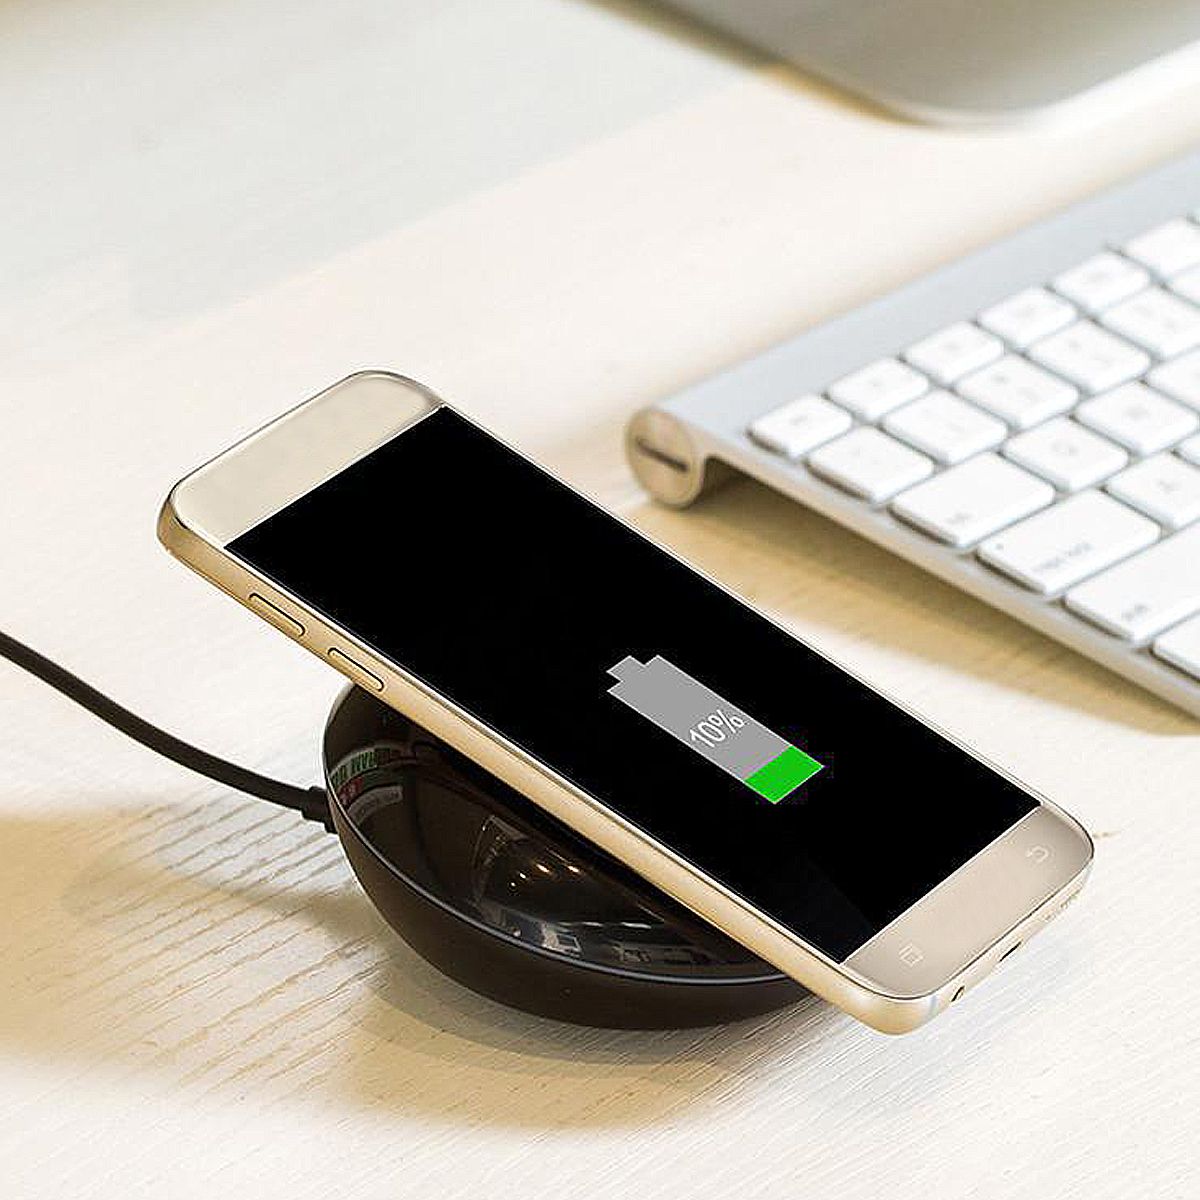 Bakeey-Qi-Wireless-Fast-Charger-With-LED-Indicator-For-iPhone-X-8Plus-Samsung-S7-S8-Note-8-1217829